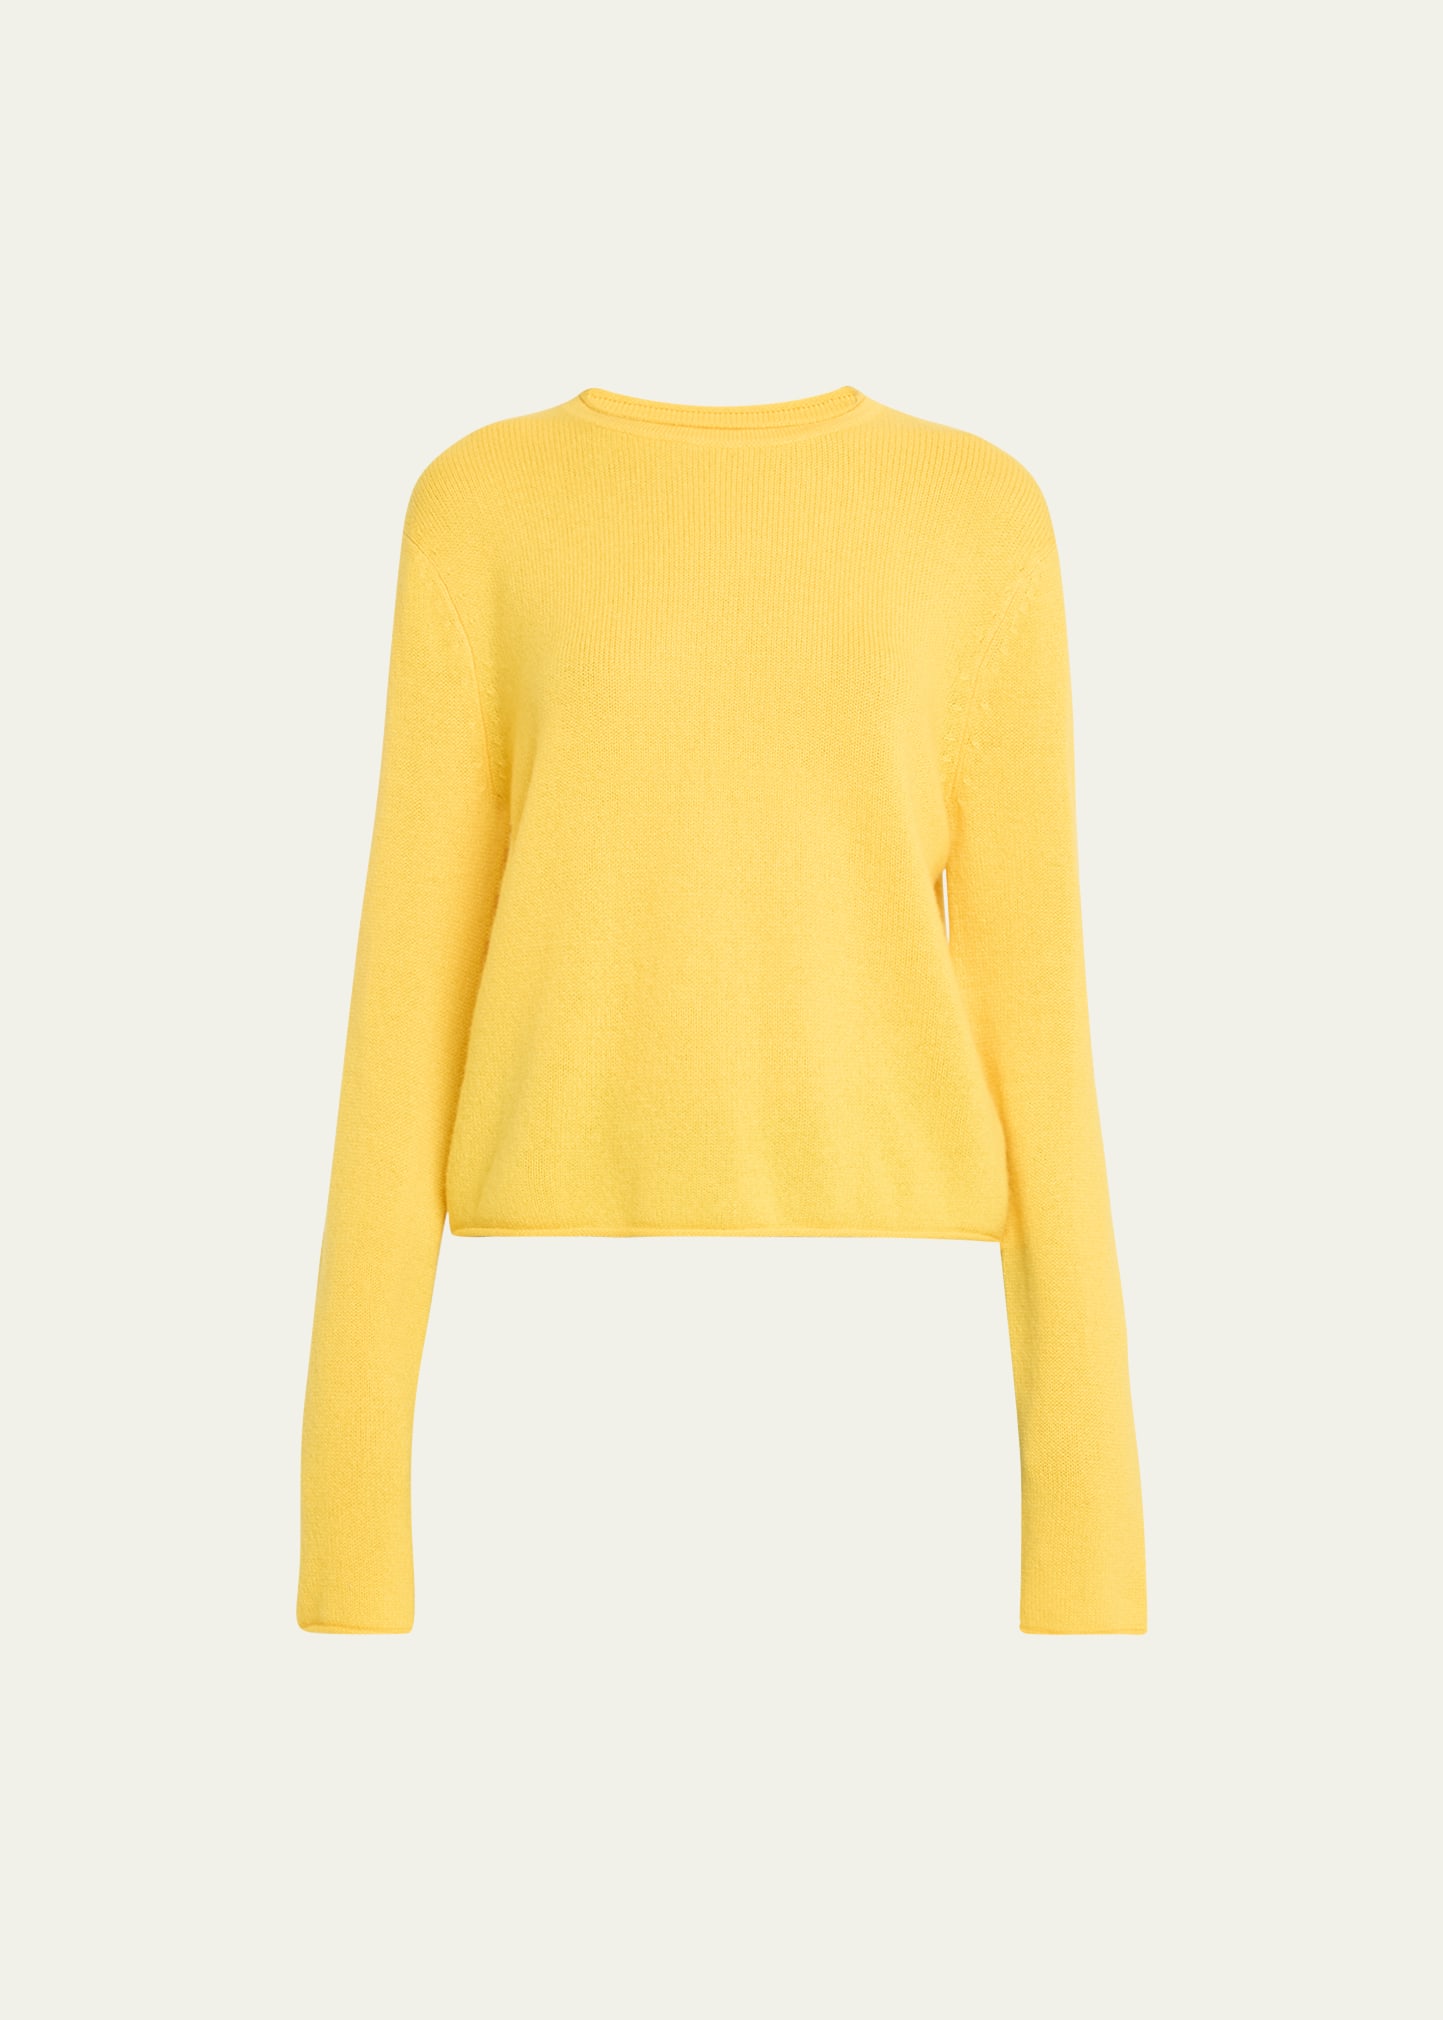 Cashmere Round-Neck Long-Sleeve Crop Top